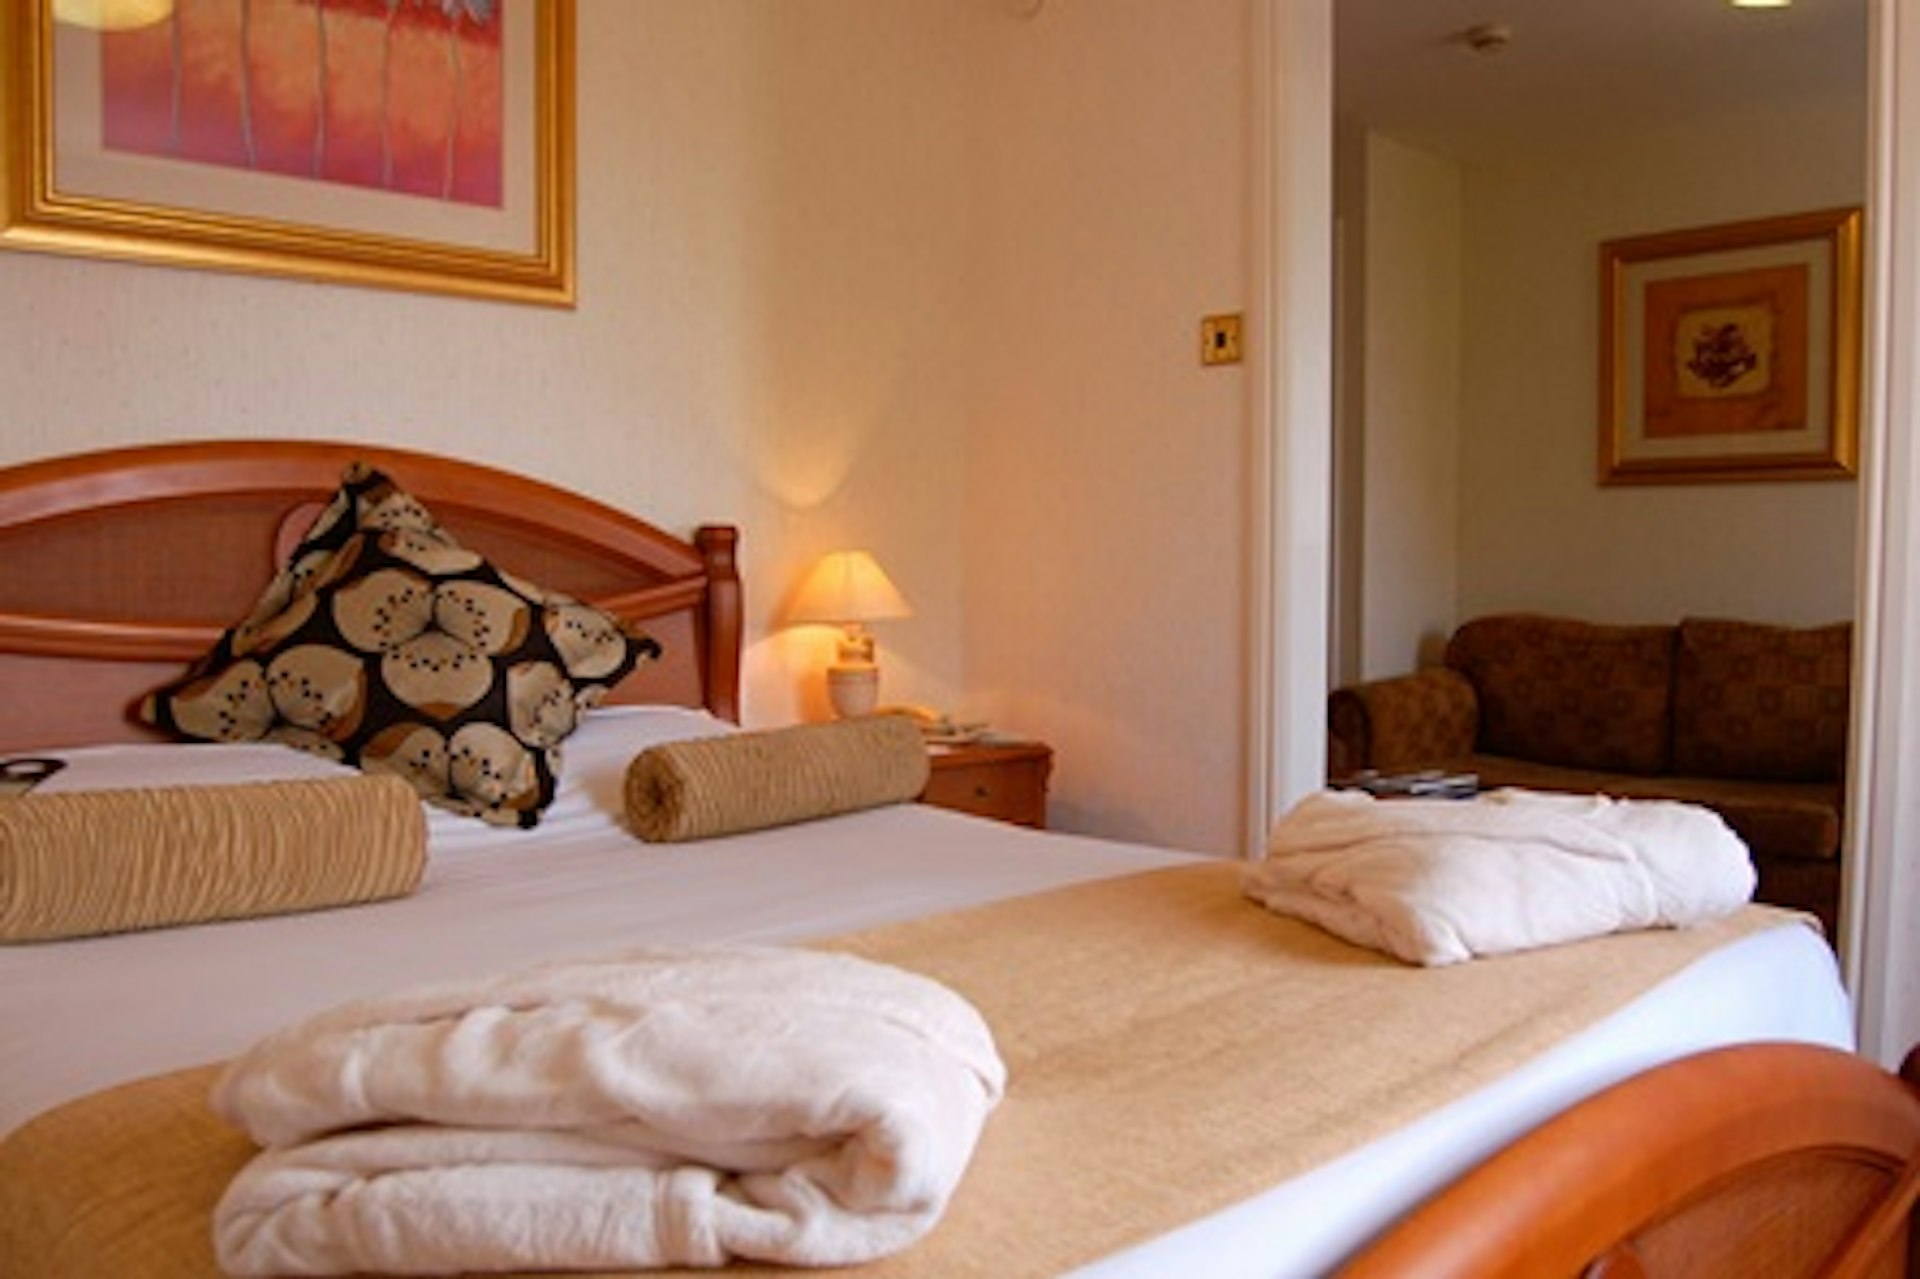 One Night Revitalising Spa Break with Dinner and Treatments for Two at Bannatyne Charlton House 4